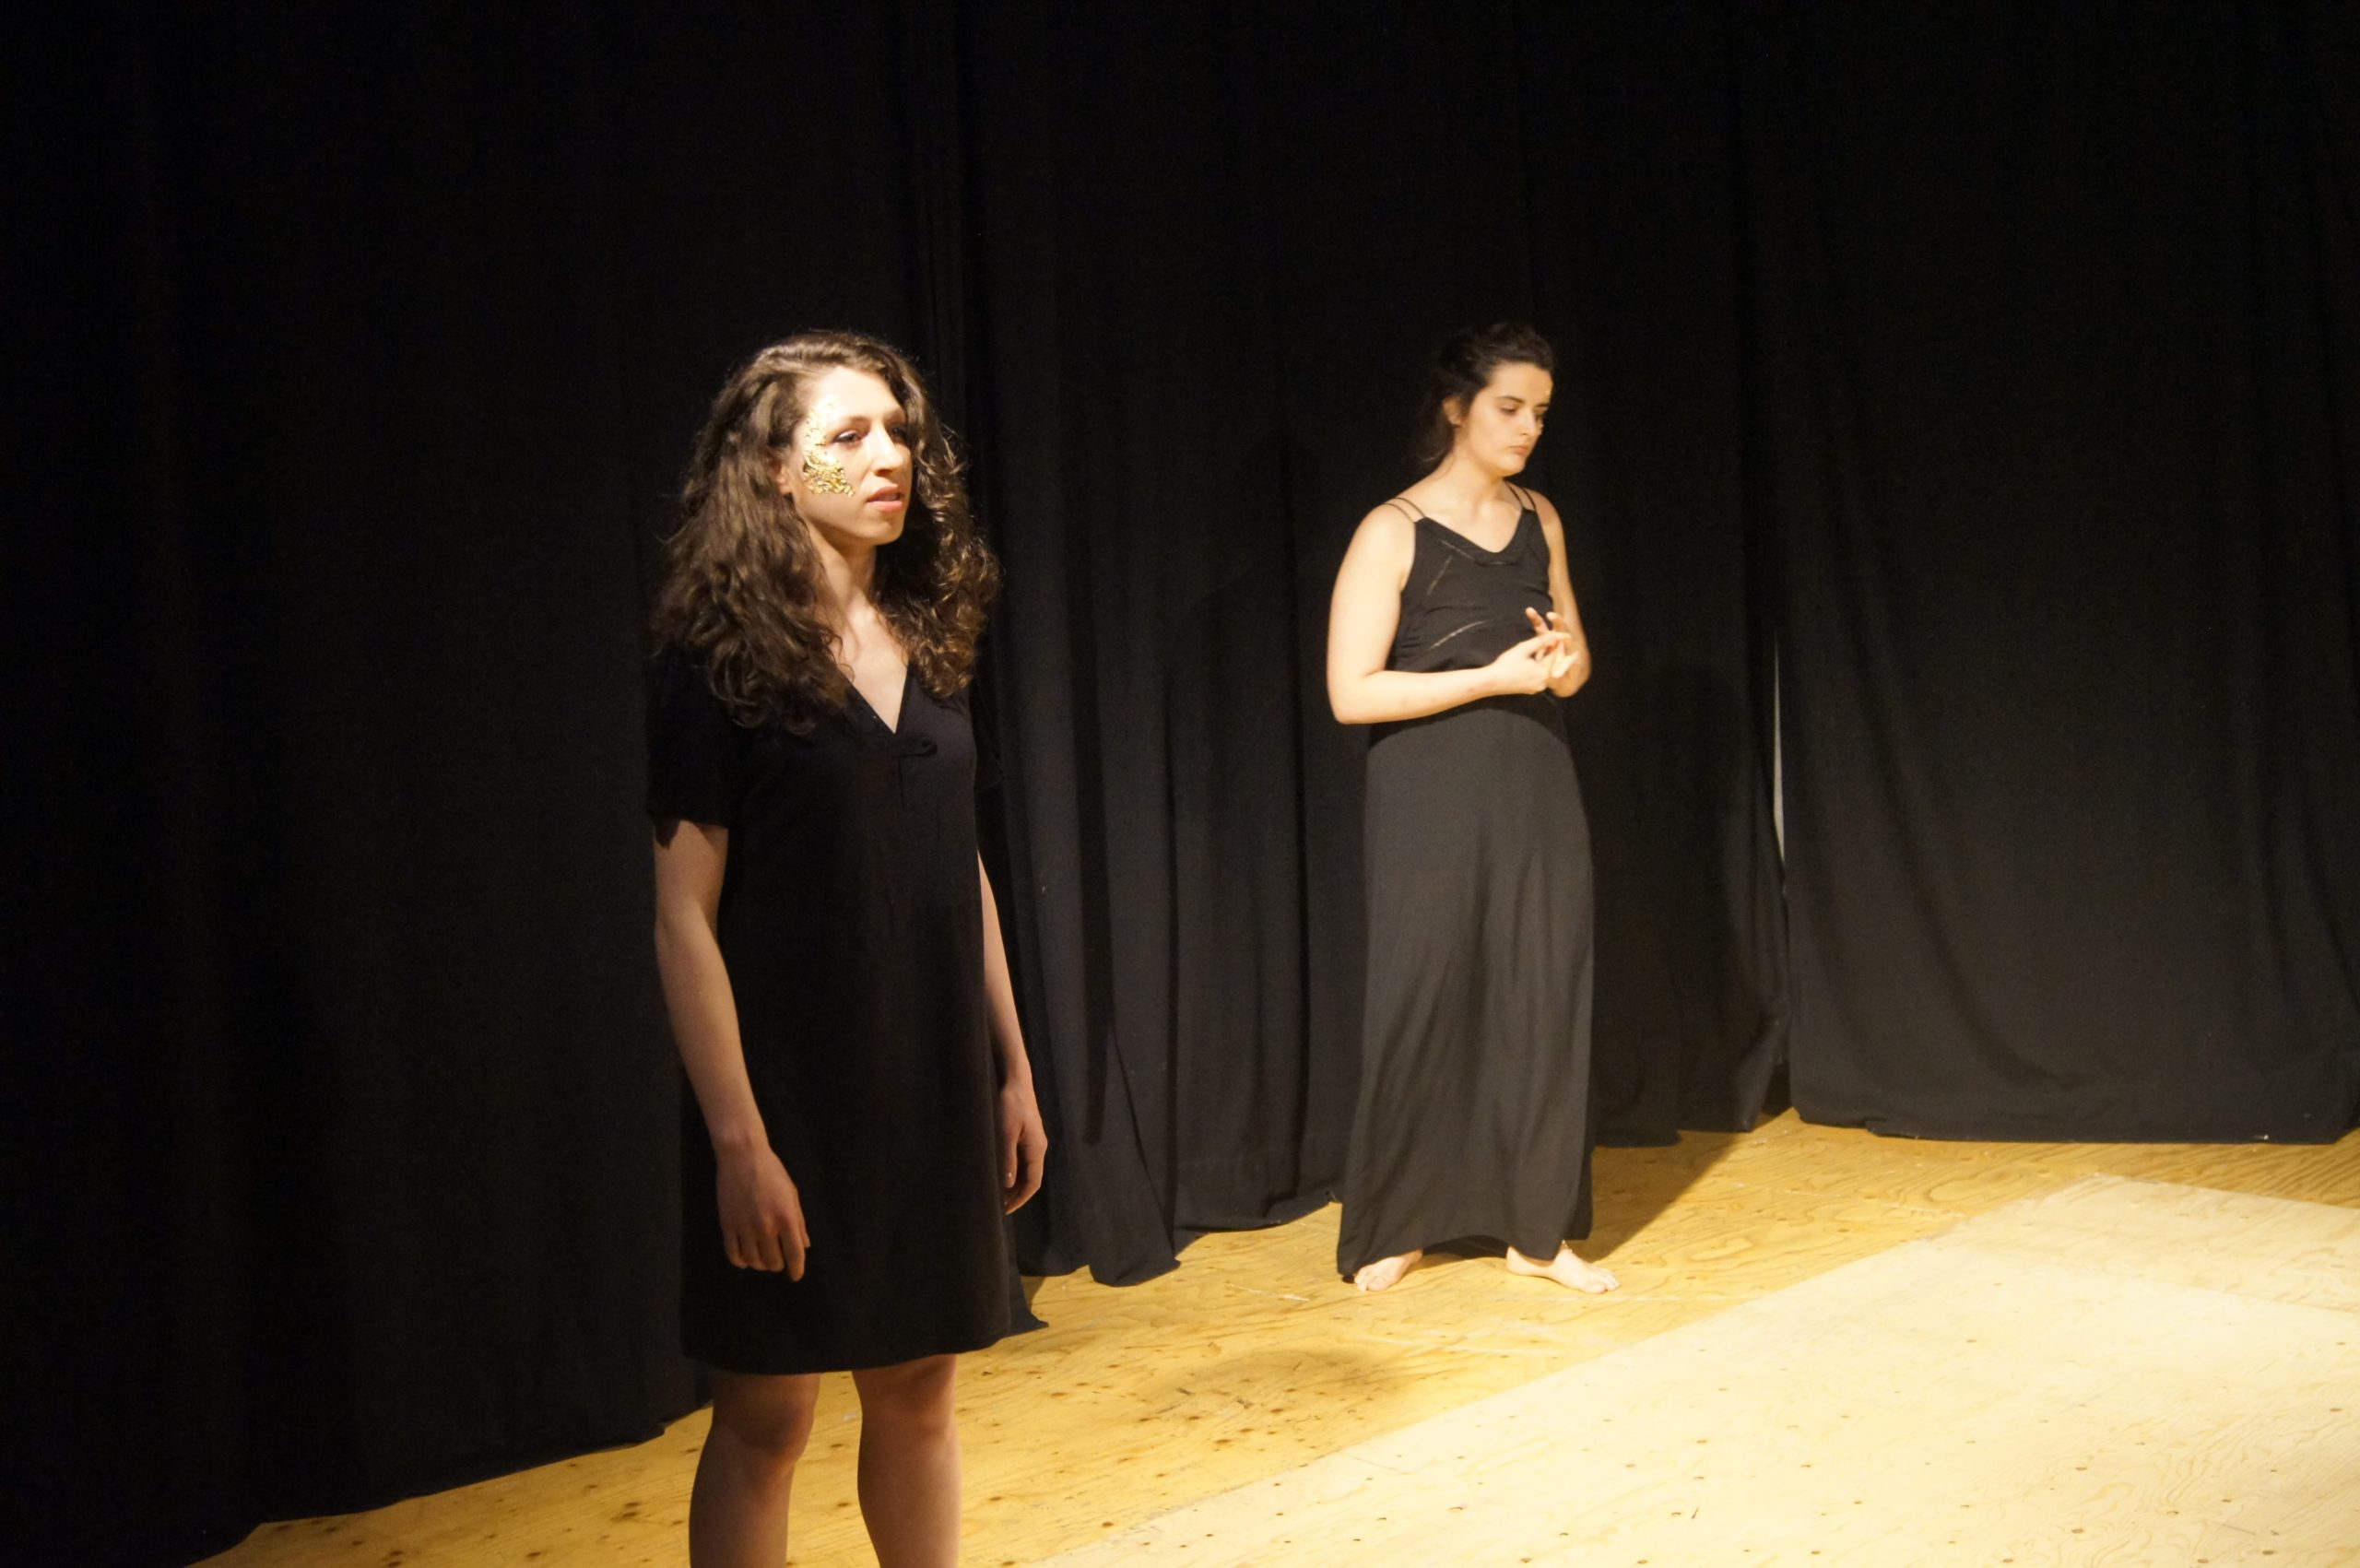 Theatre performance, two women on stage with black dresses. One is reciting, the other one looks sad or concerned